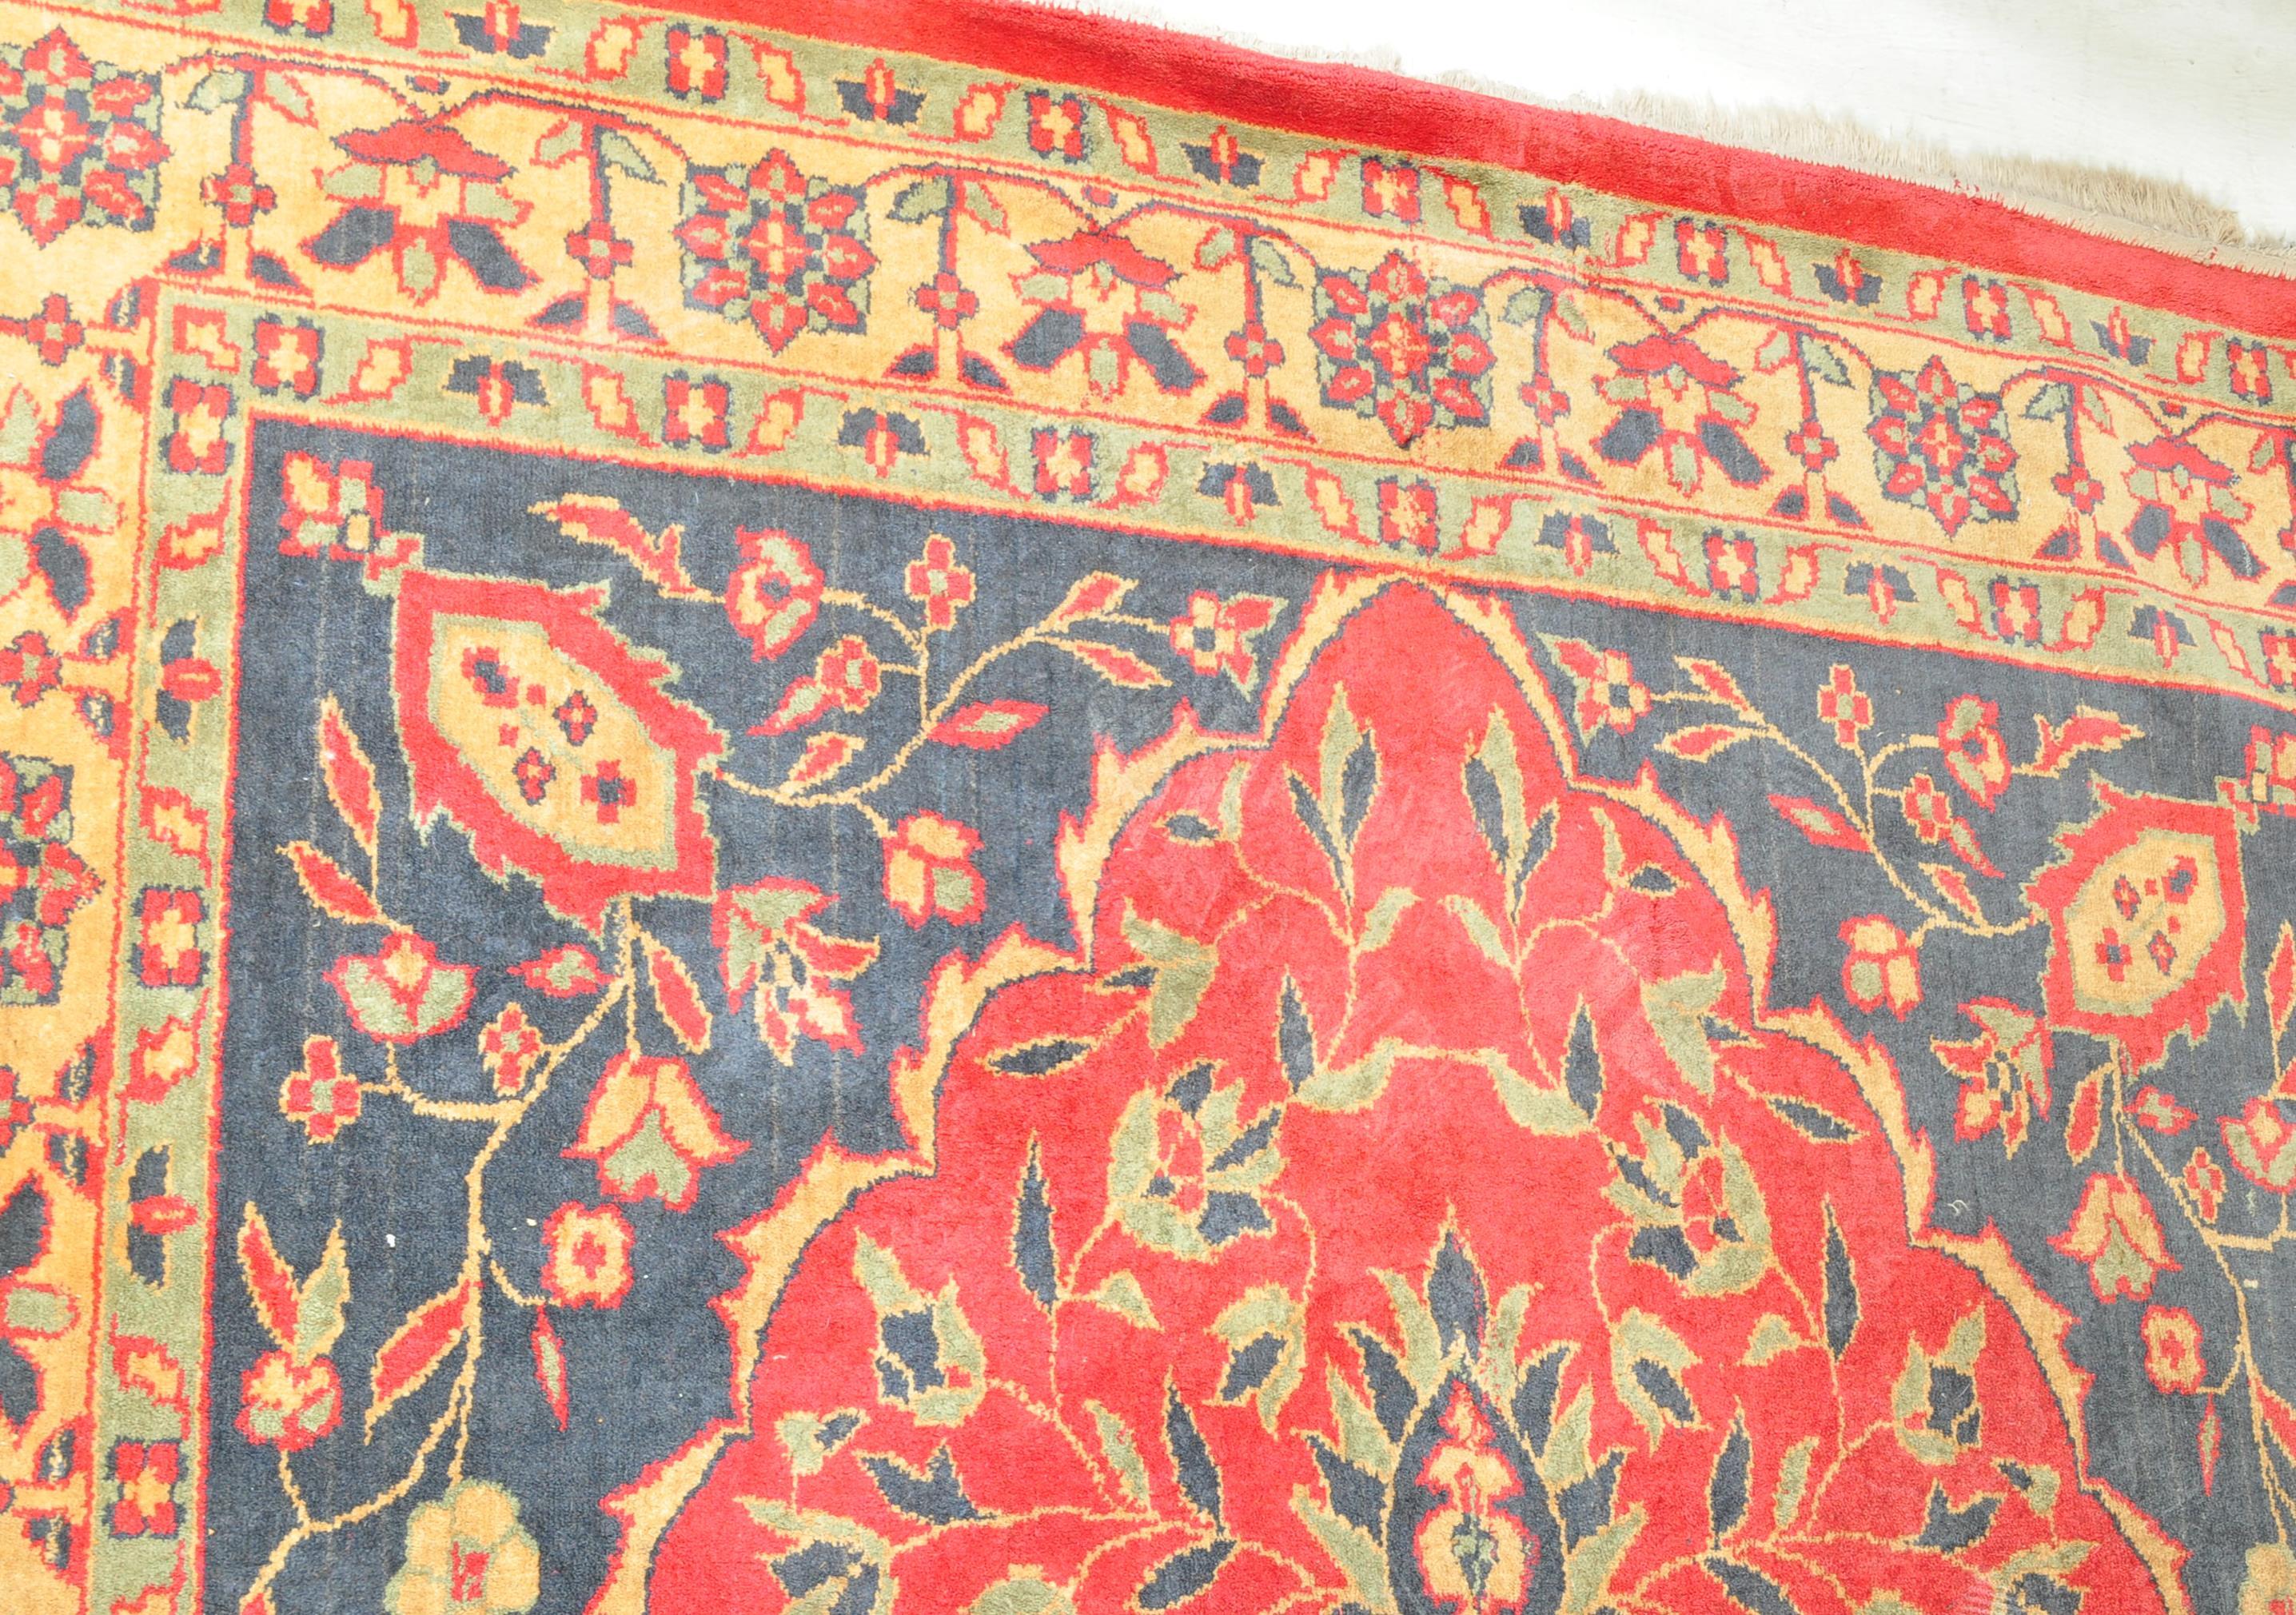 20TH CENTURY HAND KNOTTED WOOL ON WOOL PERSIAN CARPET RUG - Image 4 of 5